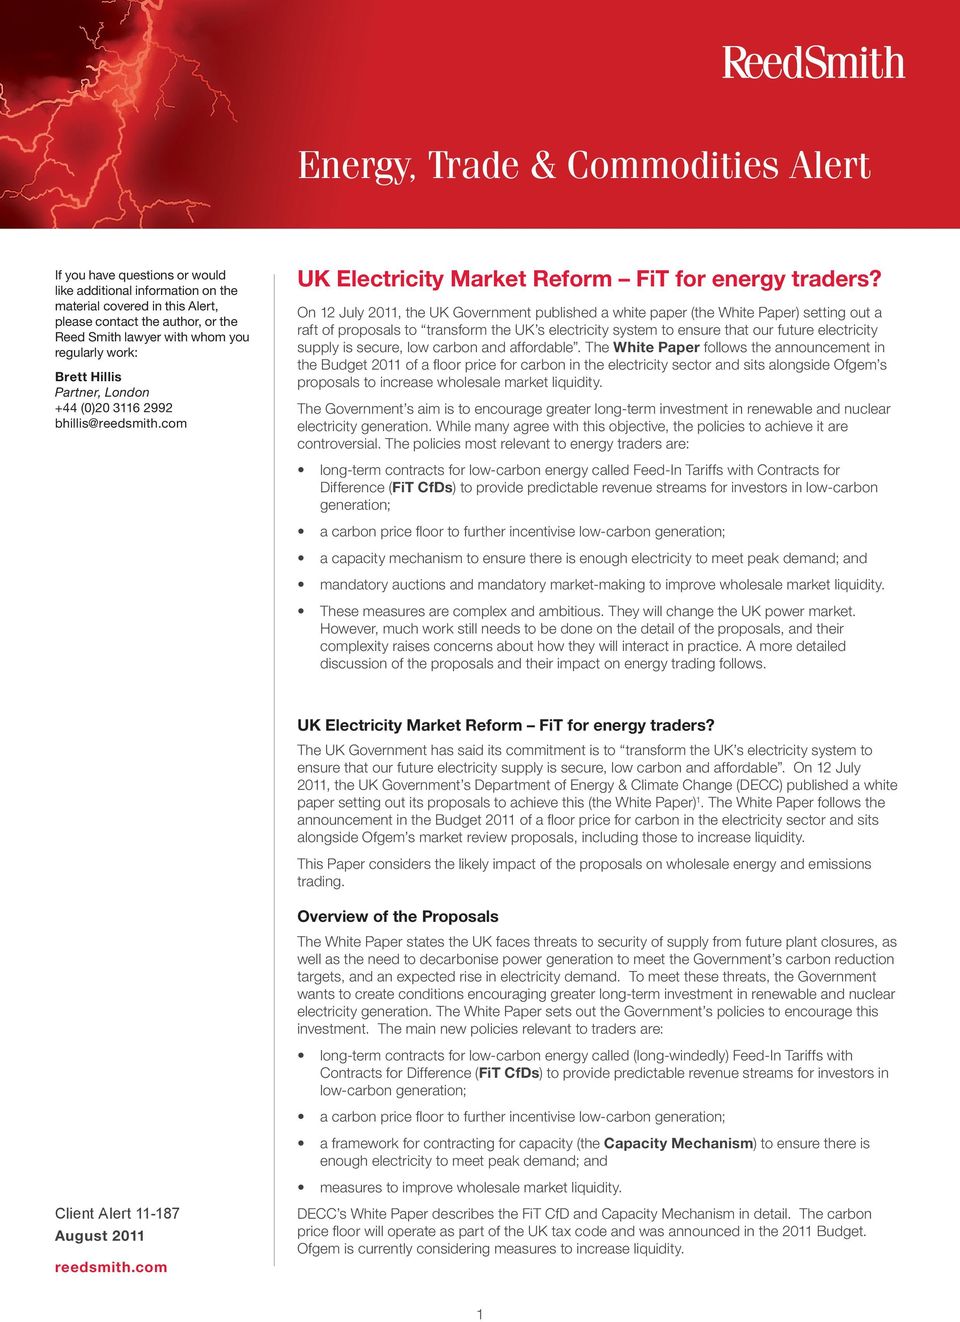 On 12 July 2011, the UK Government published a white paper (the White Paper) setting out a raft of proposals to transform the UK s electricity system to ensure that our future electricity supply is